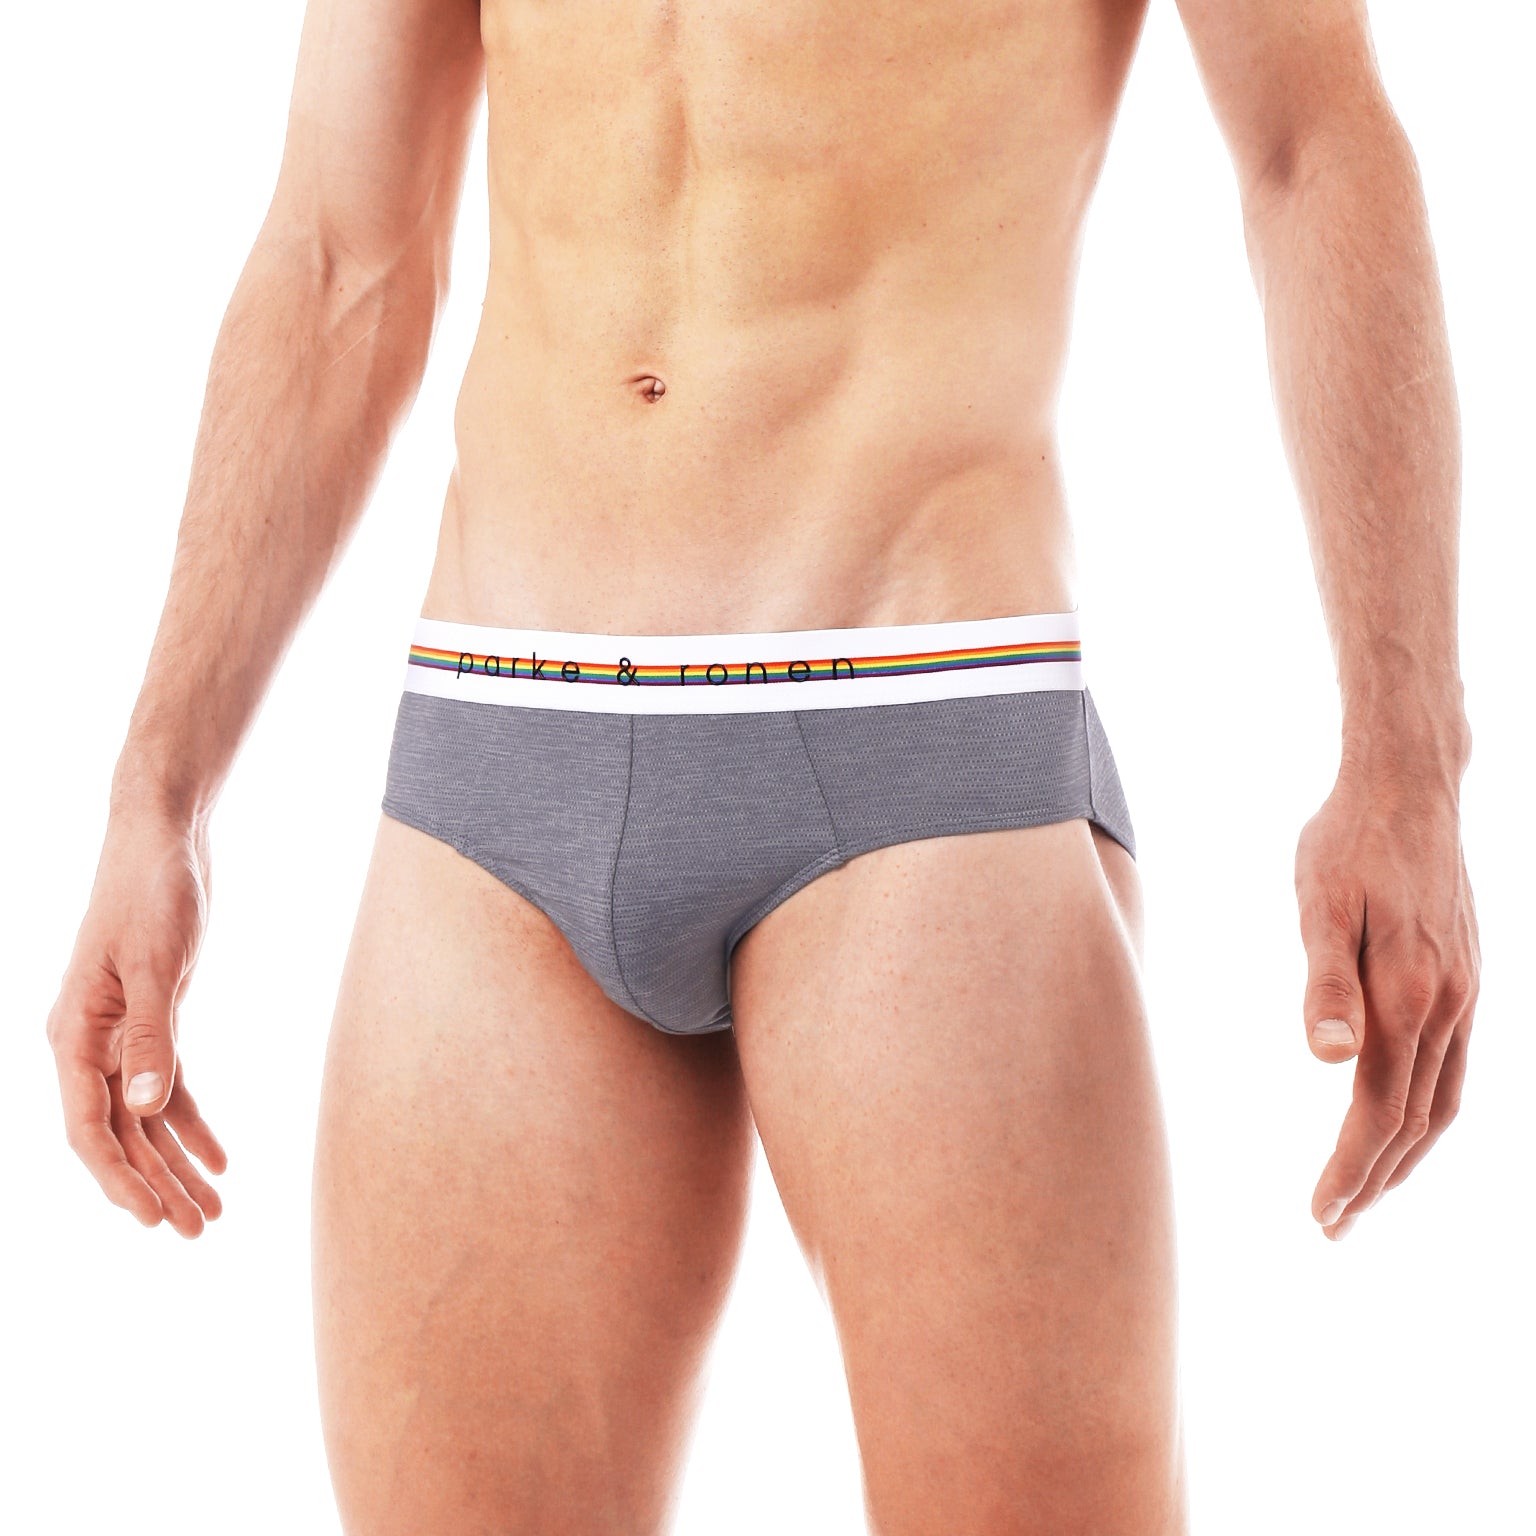 LIMITED PRIDE EDITION- Dove Grey Heather Mesh Low Rise Brief